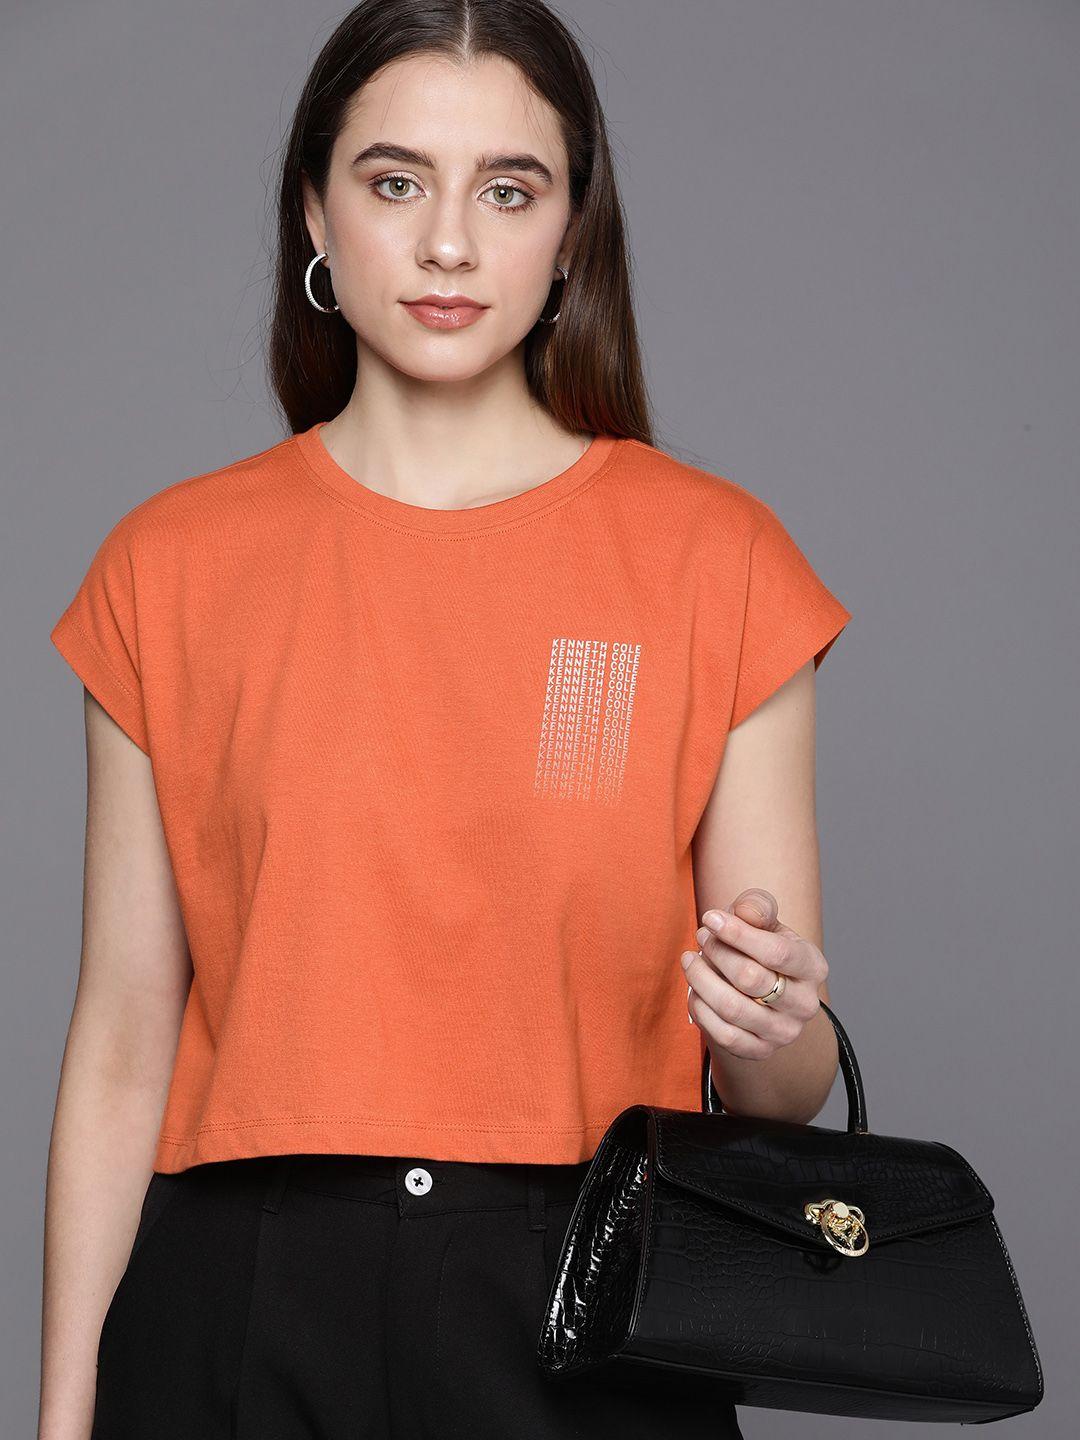 kenneth cole signature tee women rust orange extended sleeves pure cotton t-shirt